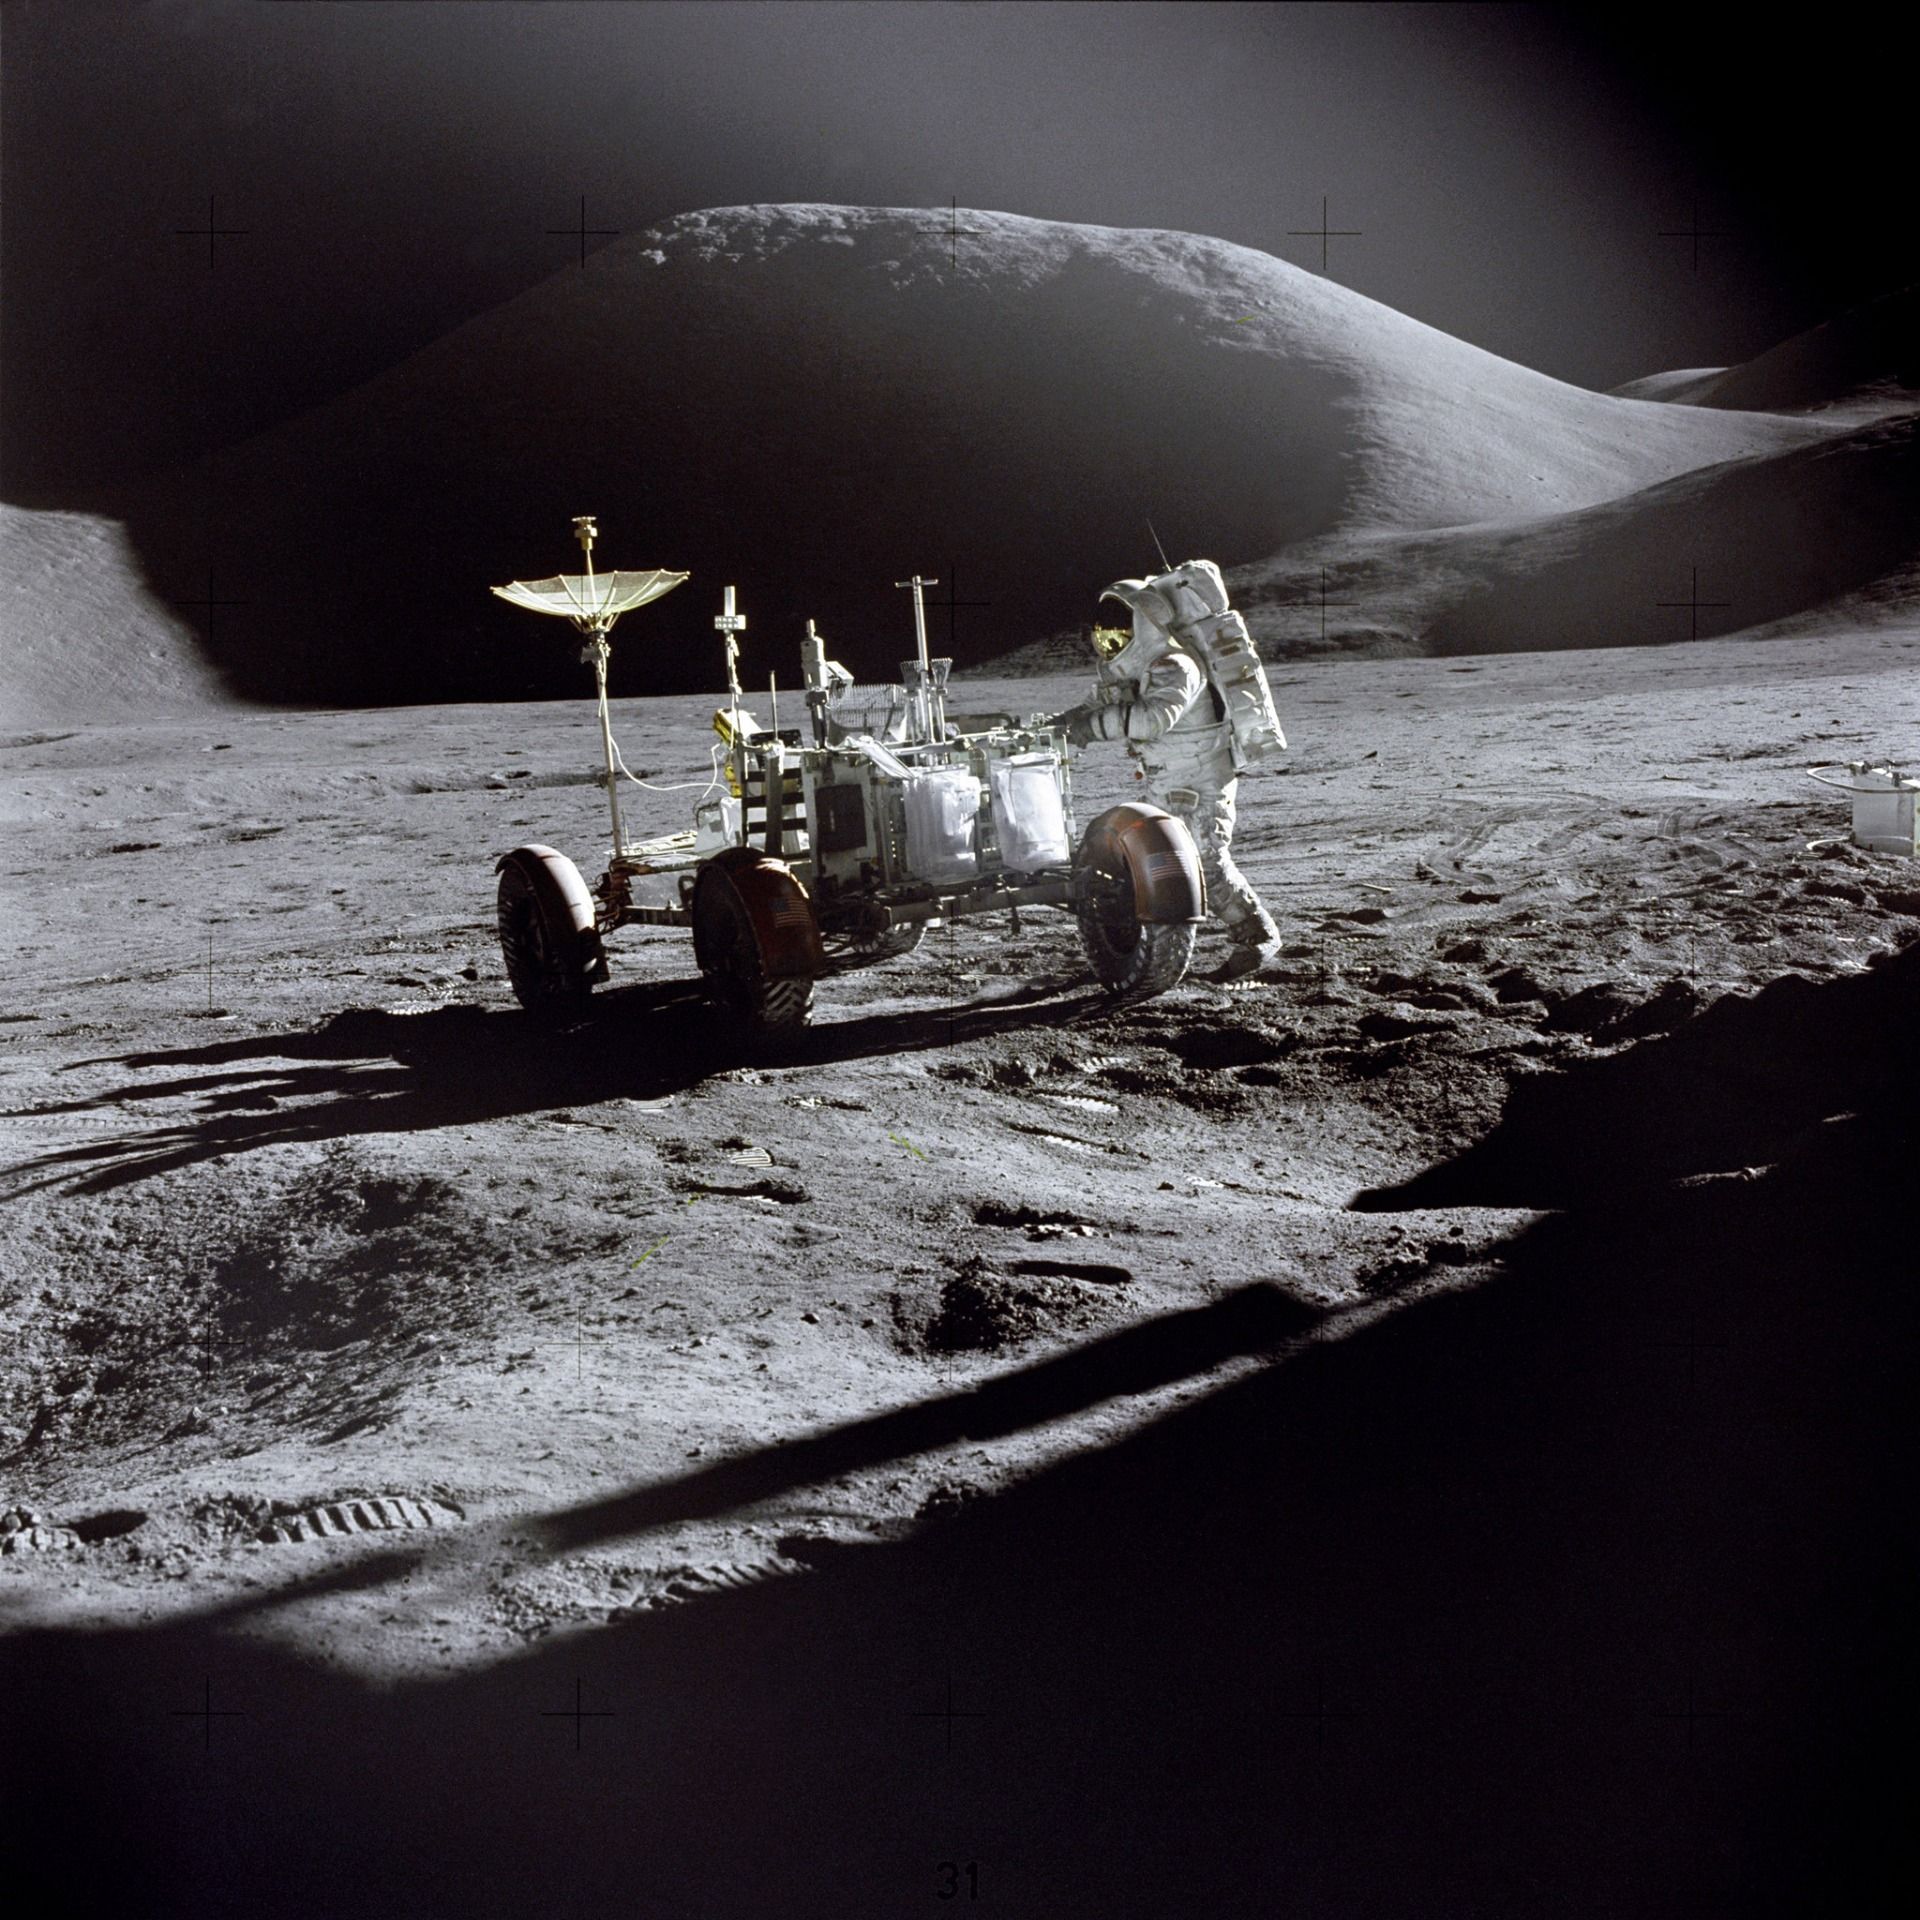 Irwin with the Lunar Rover during Apollo 15